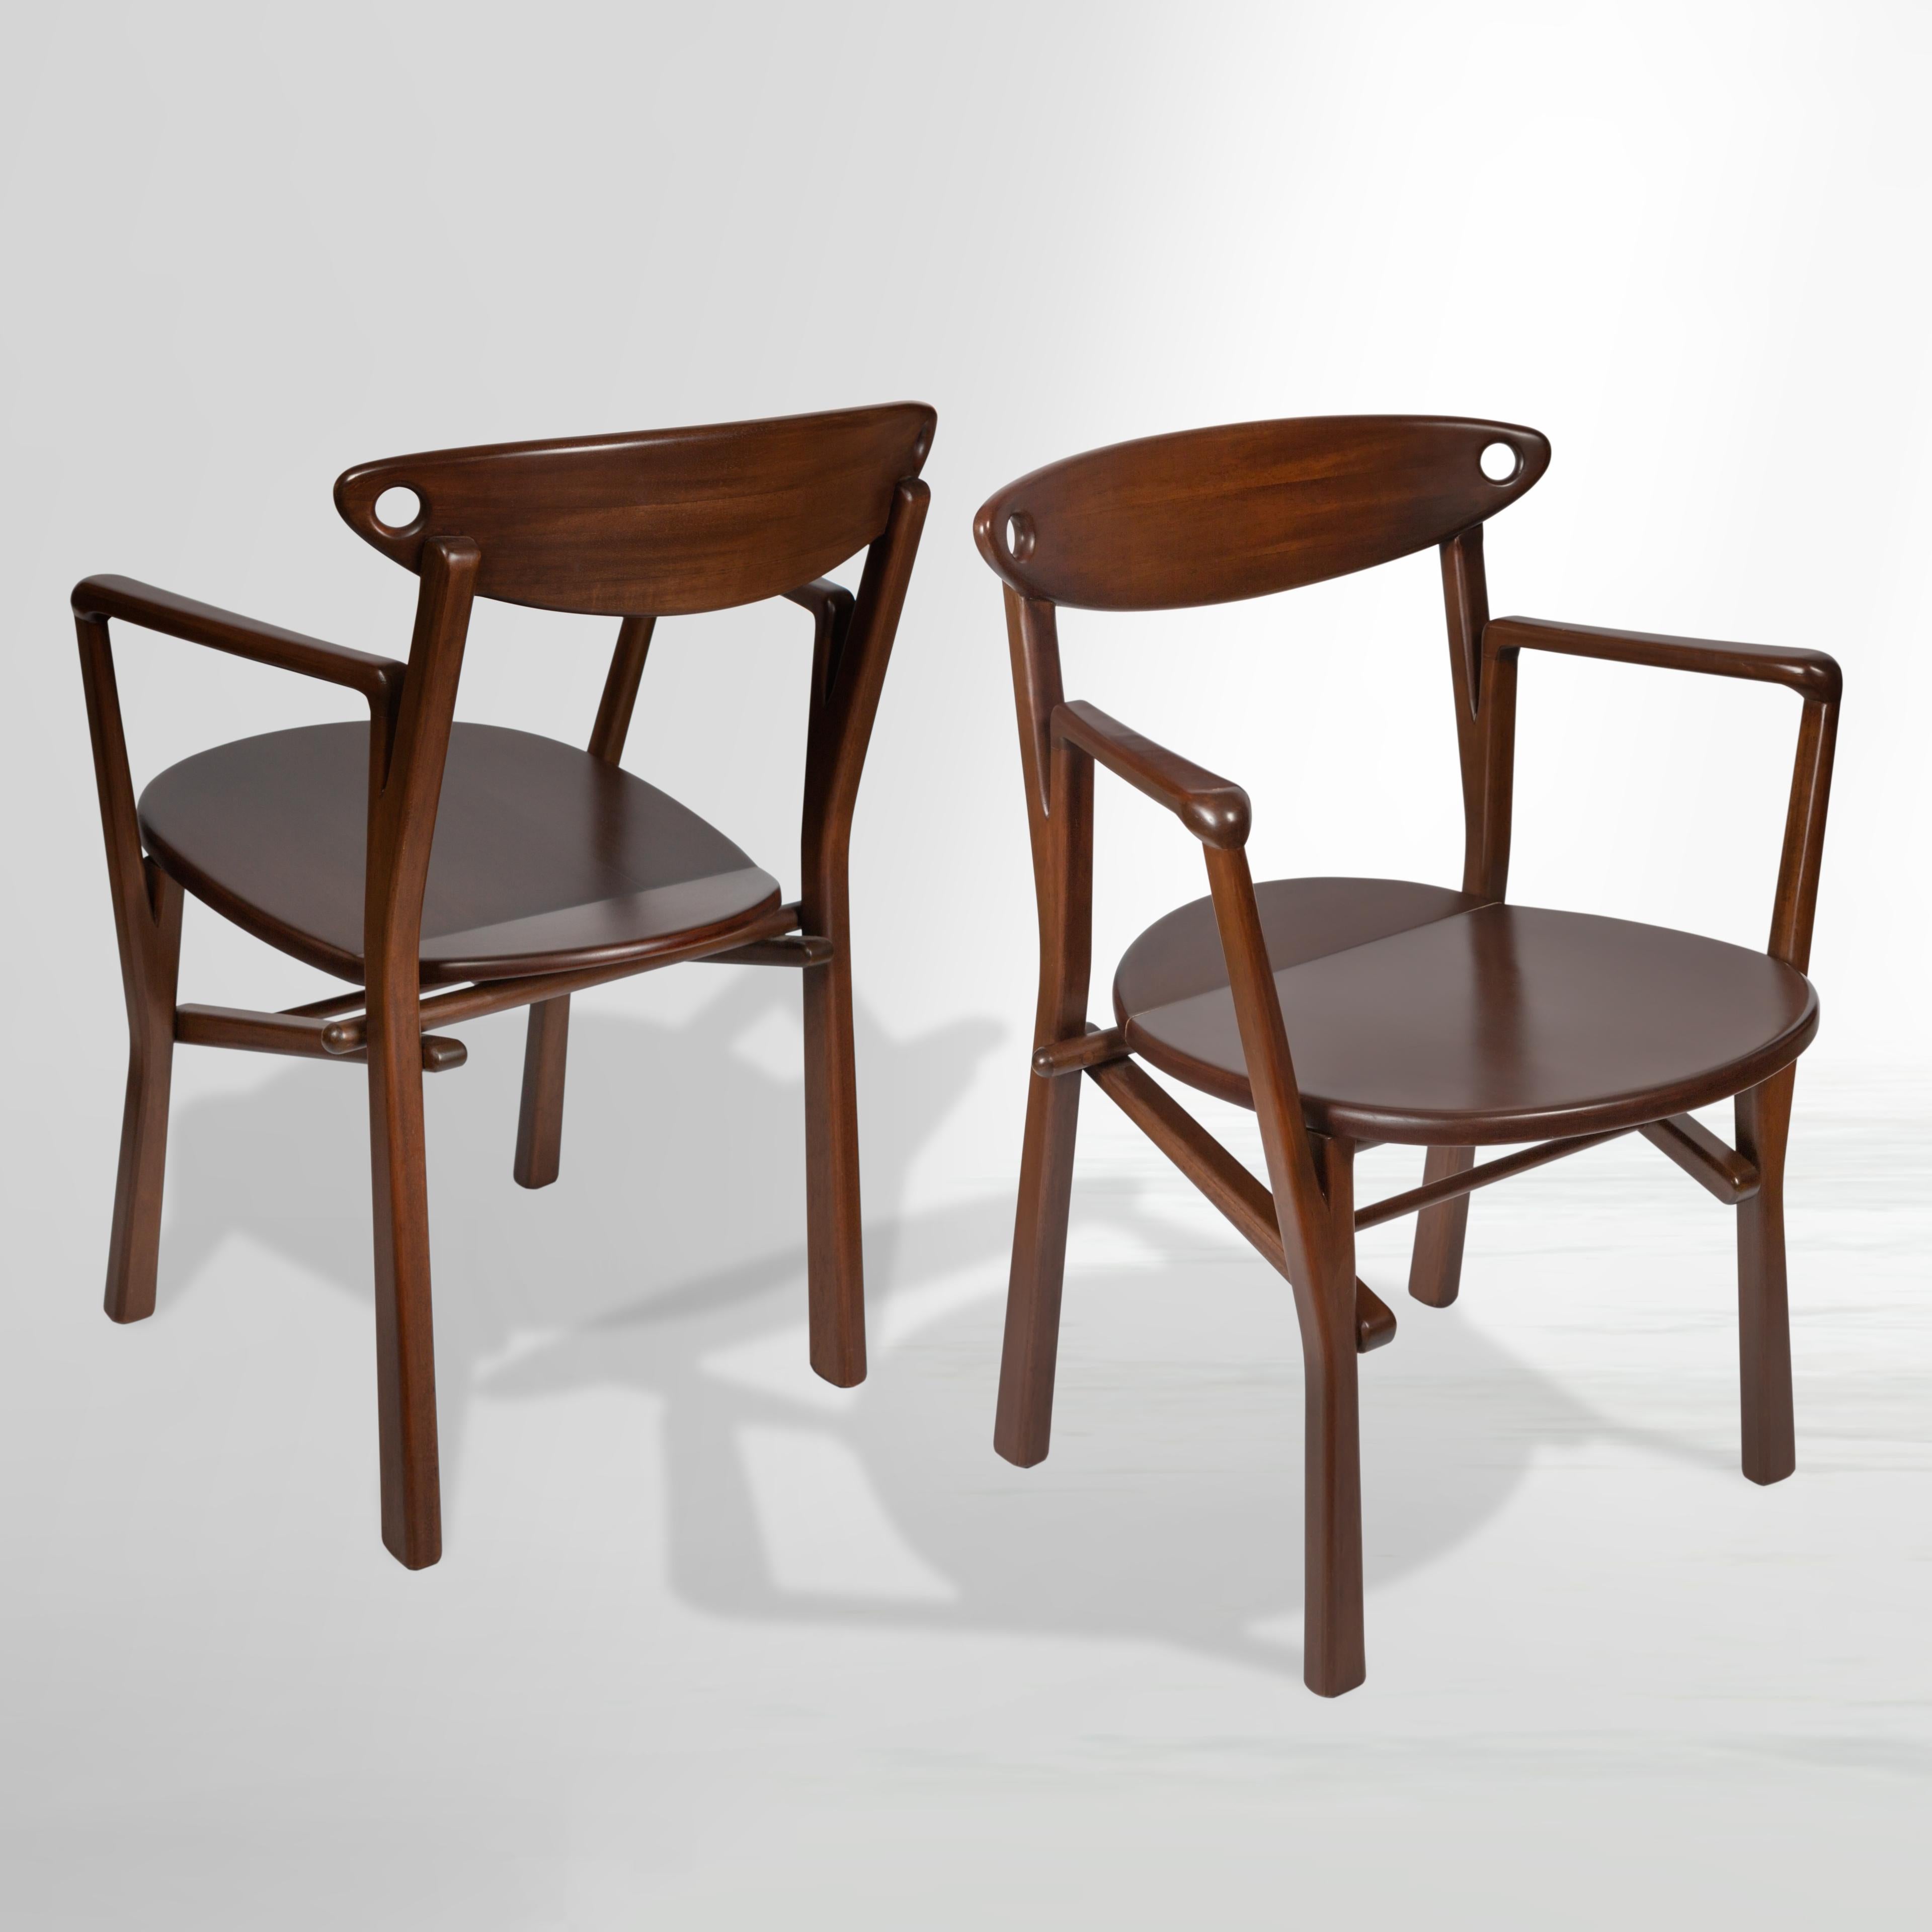 Brazilian Set of 02 Armchairs Laje in Dark Brown Finish Wood - Ready for Delivery For Sale